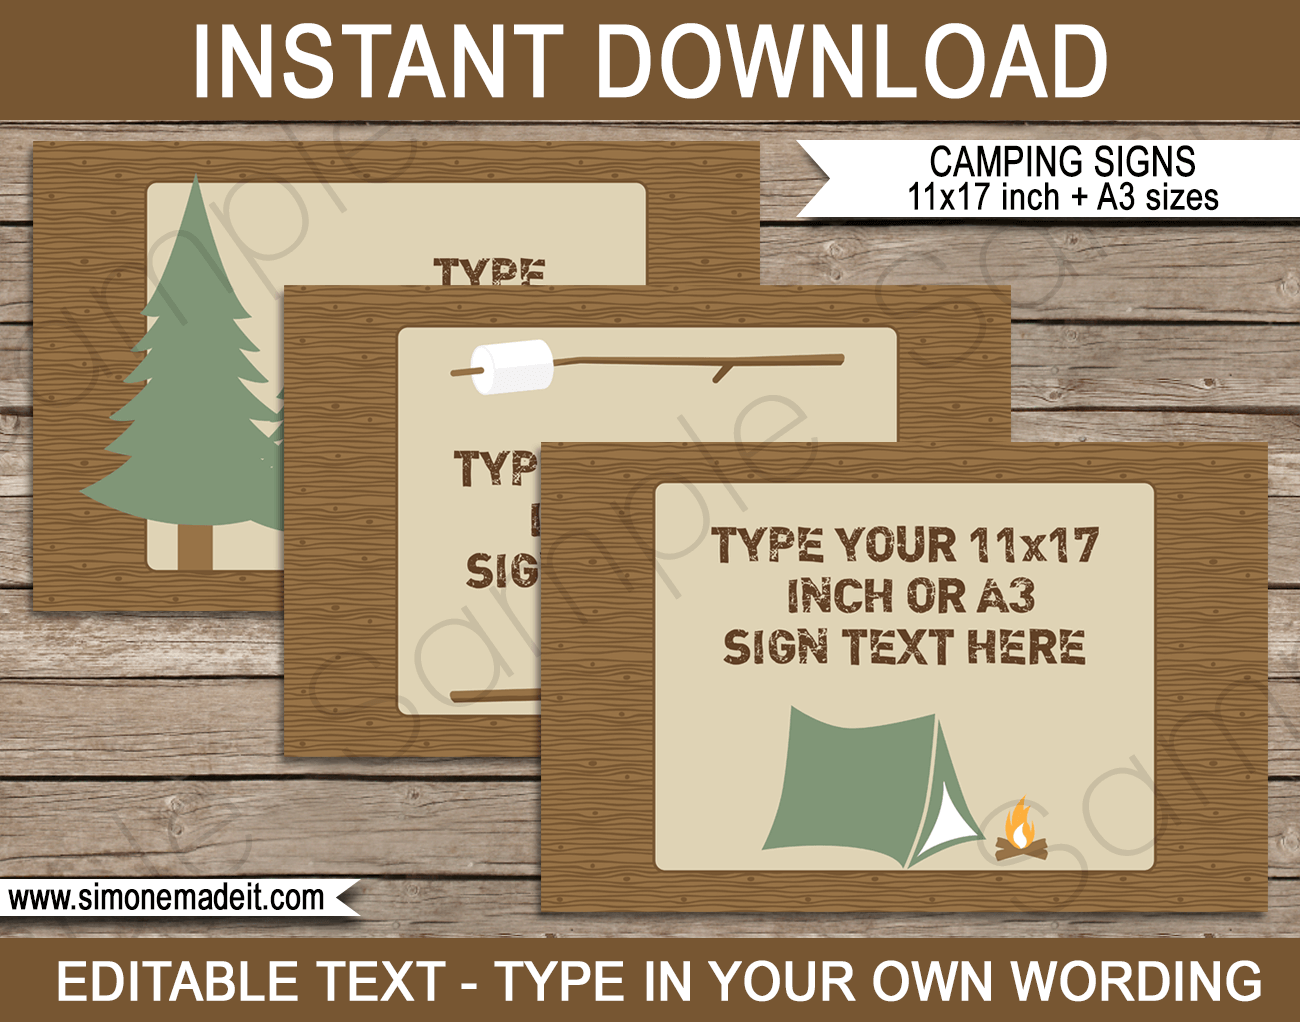 Printable Camping Party Signs | Editable & DIY Templates | Party Decorations | Tabloid / Ledger 11x17 inches | A3 | $4.00 Instant Download via SIMONEmadeit.com